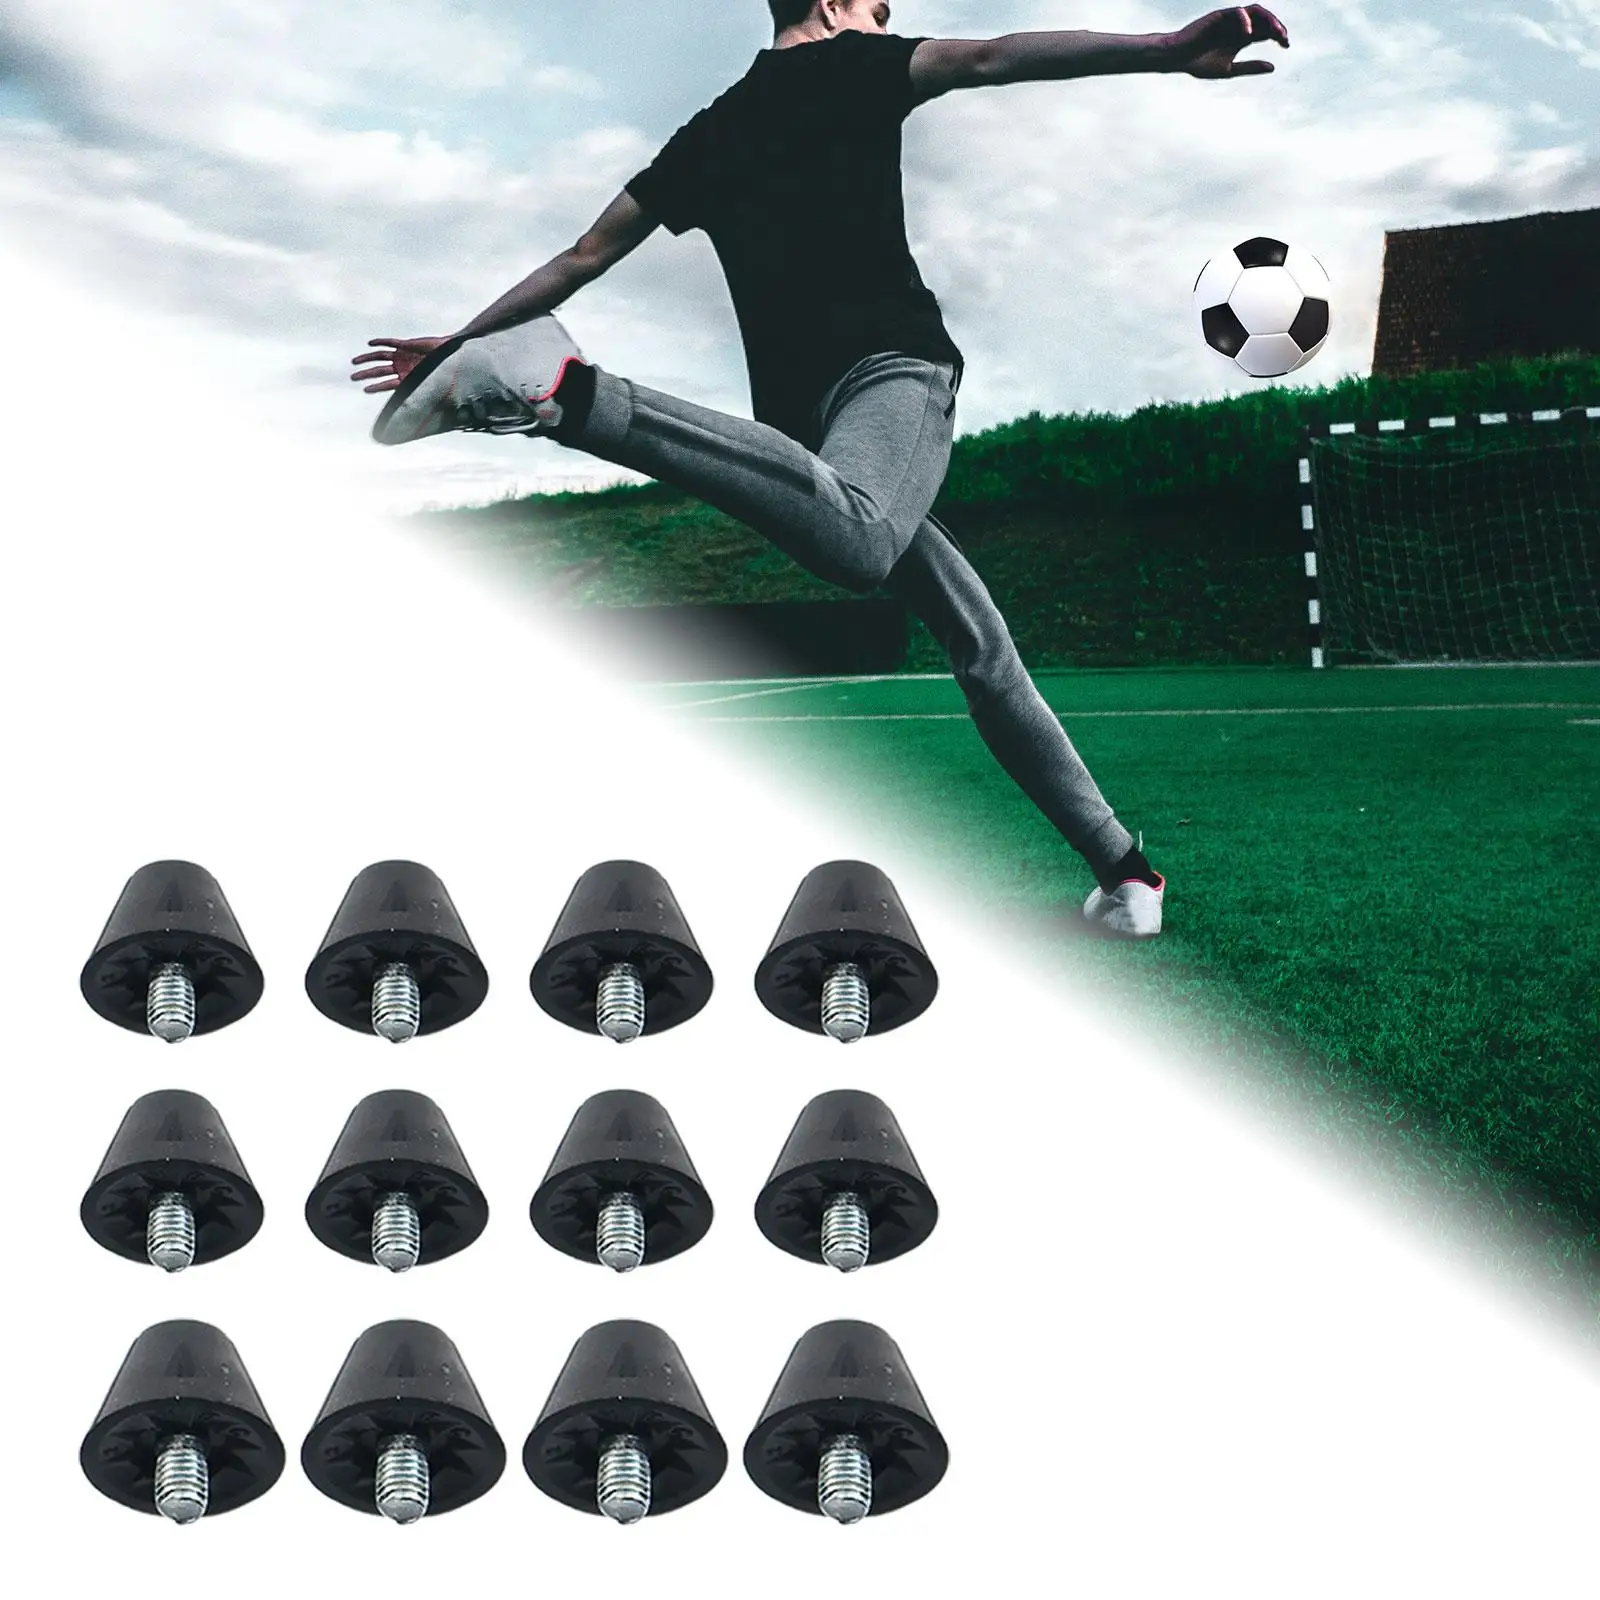 12x Football Shoe Spikes Turf Comfortable M5 Anti Slip Screw in Firm Ground Soccer Boot Cleats for Athletic Sneakers Training